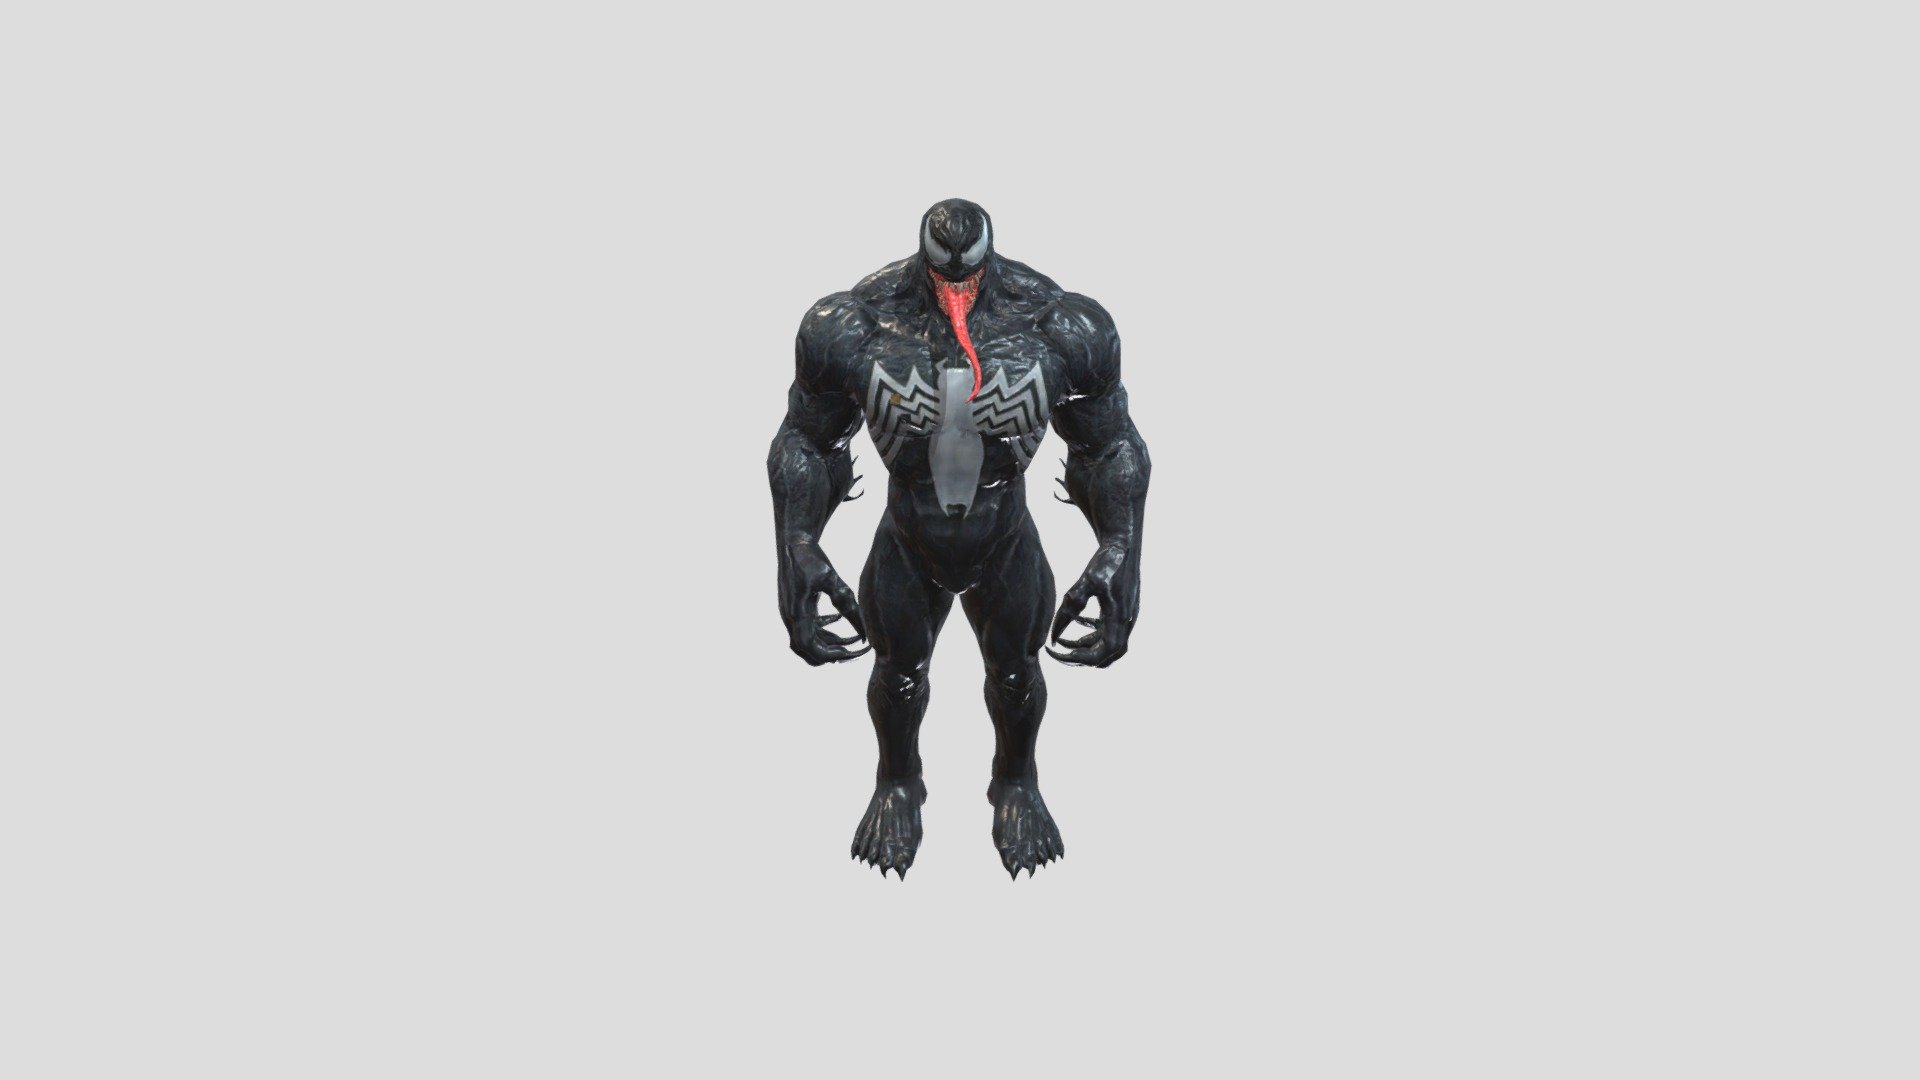 Venom is a fictional character appearing in American comic books published by Marvel Comics. The character is a sentient alien symbiote with an amorphous, liquid-like form, who survives by bonding with a host, usually human. This dual-life form receives enhanced powers and usually refers to itself as &ldquo;Venom.